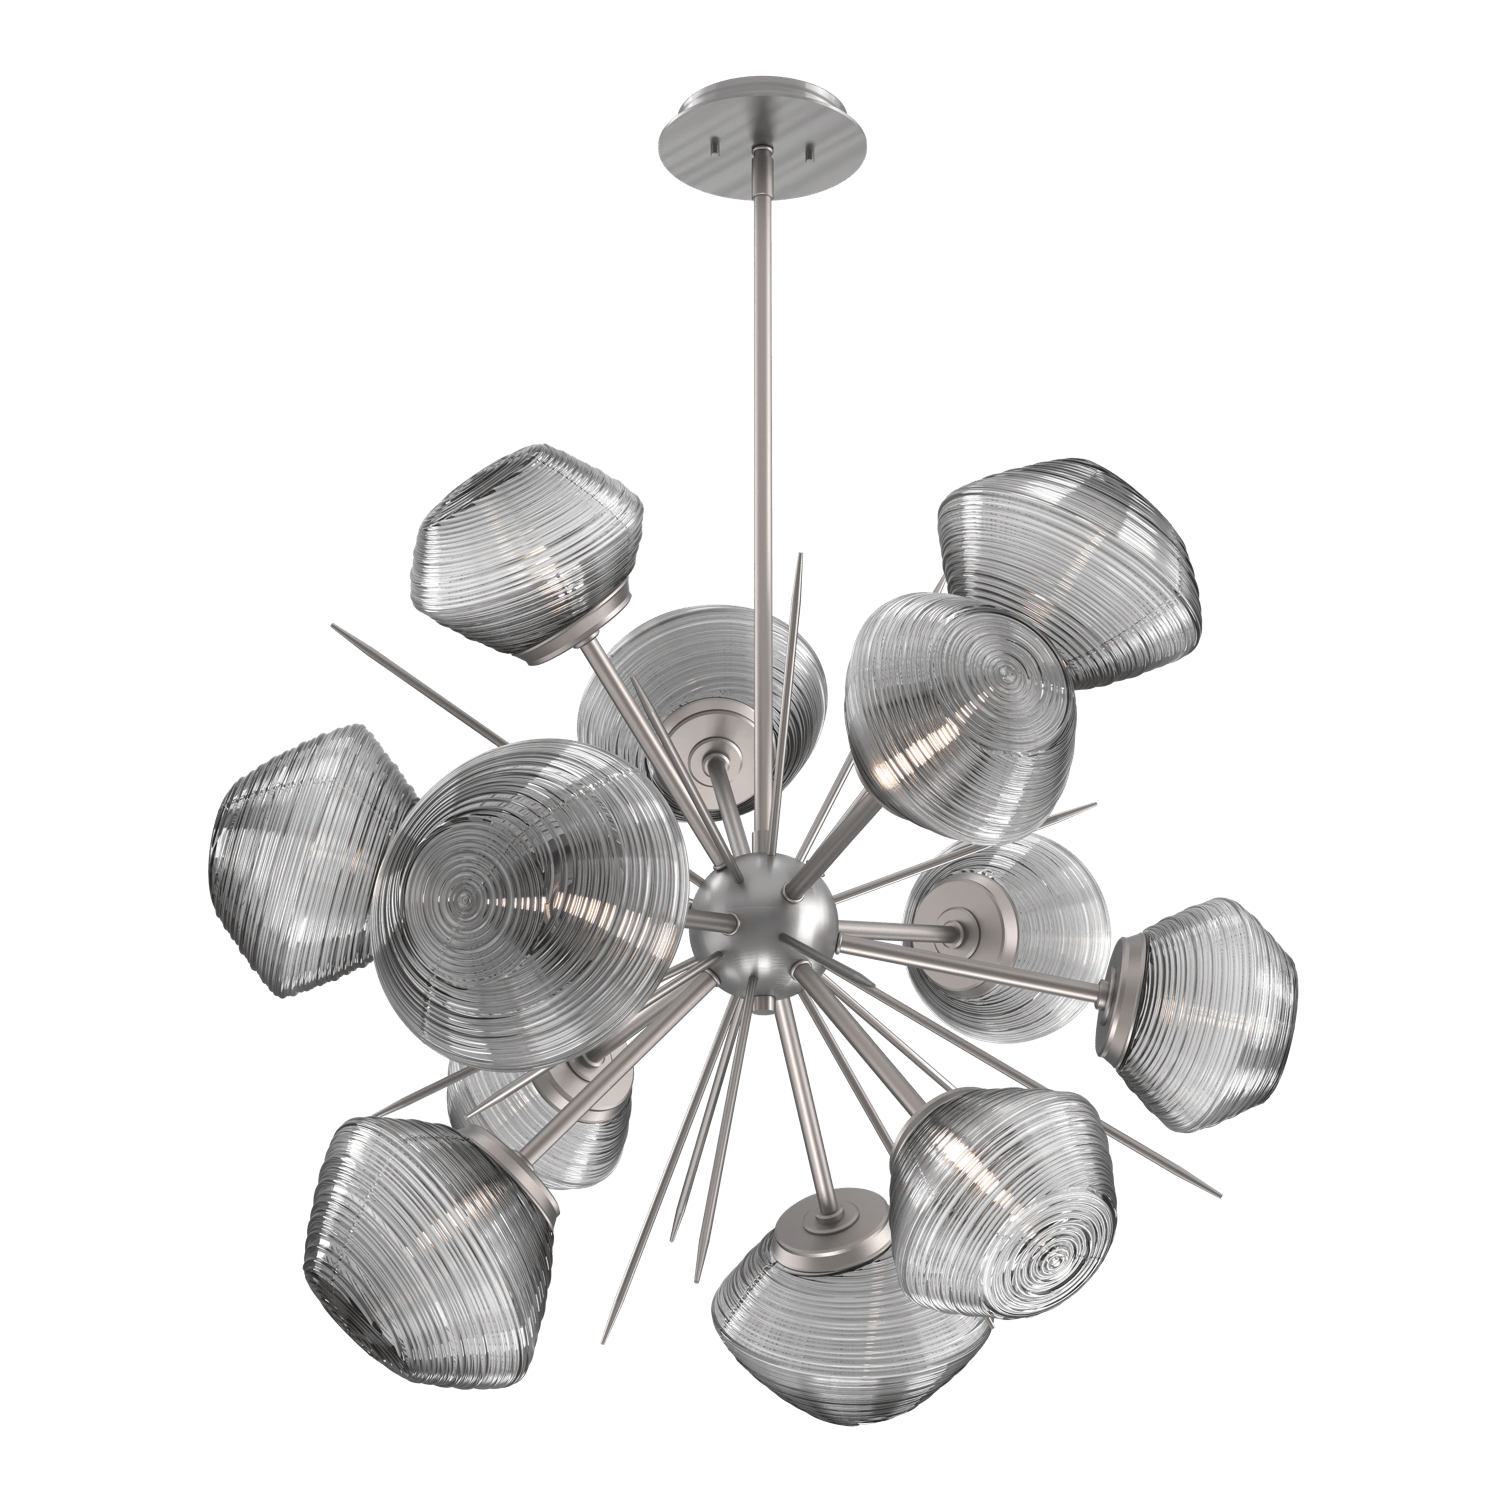 CHB0089-0G-SN-S-Hammerton-Studio-Mesa-36-inch-starburst-chandelier-with-satin-nickel-finish-and-smoke-blown-glass-shades-and-LED-lamping